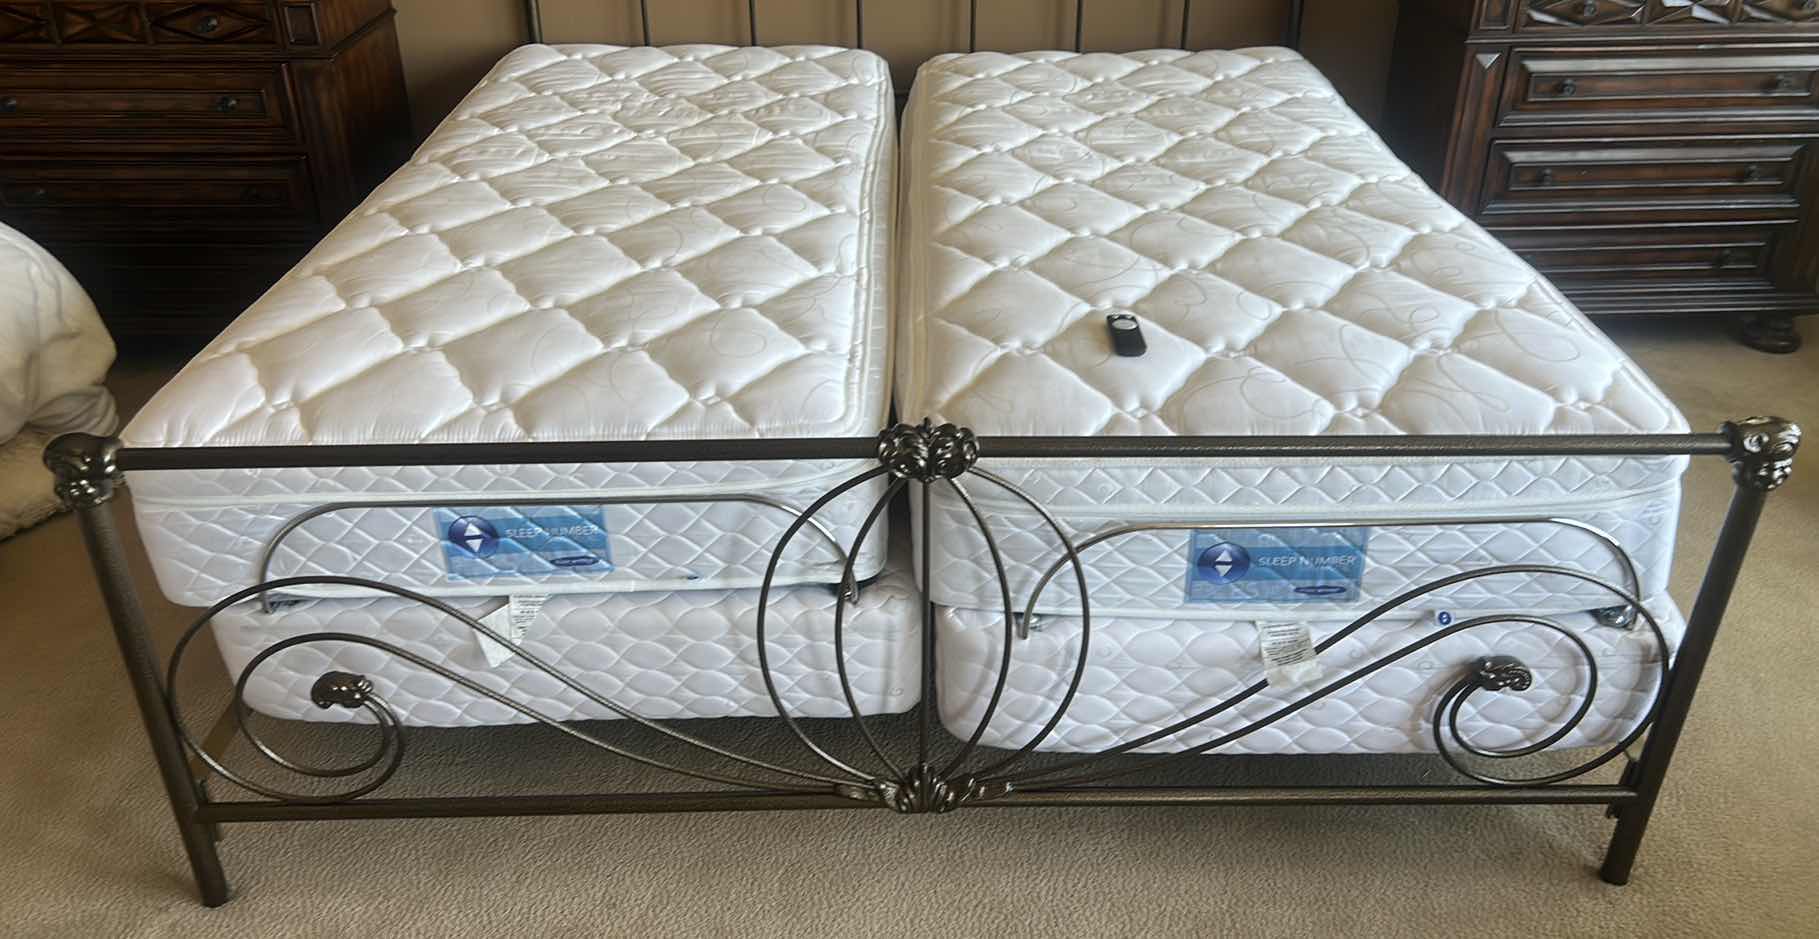 Photo 1 of 2 SLEEP NUMBER TWIN MATTRESS 5000 MODEL WITH BOX SPRINGS